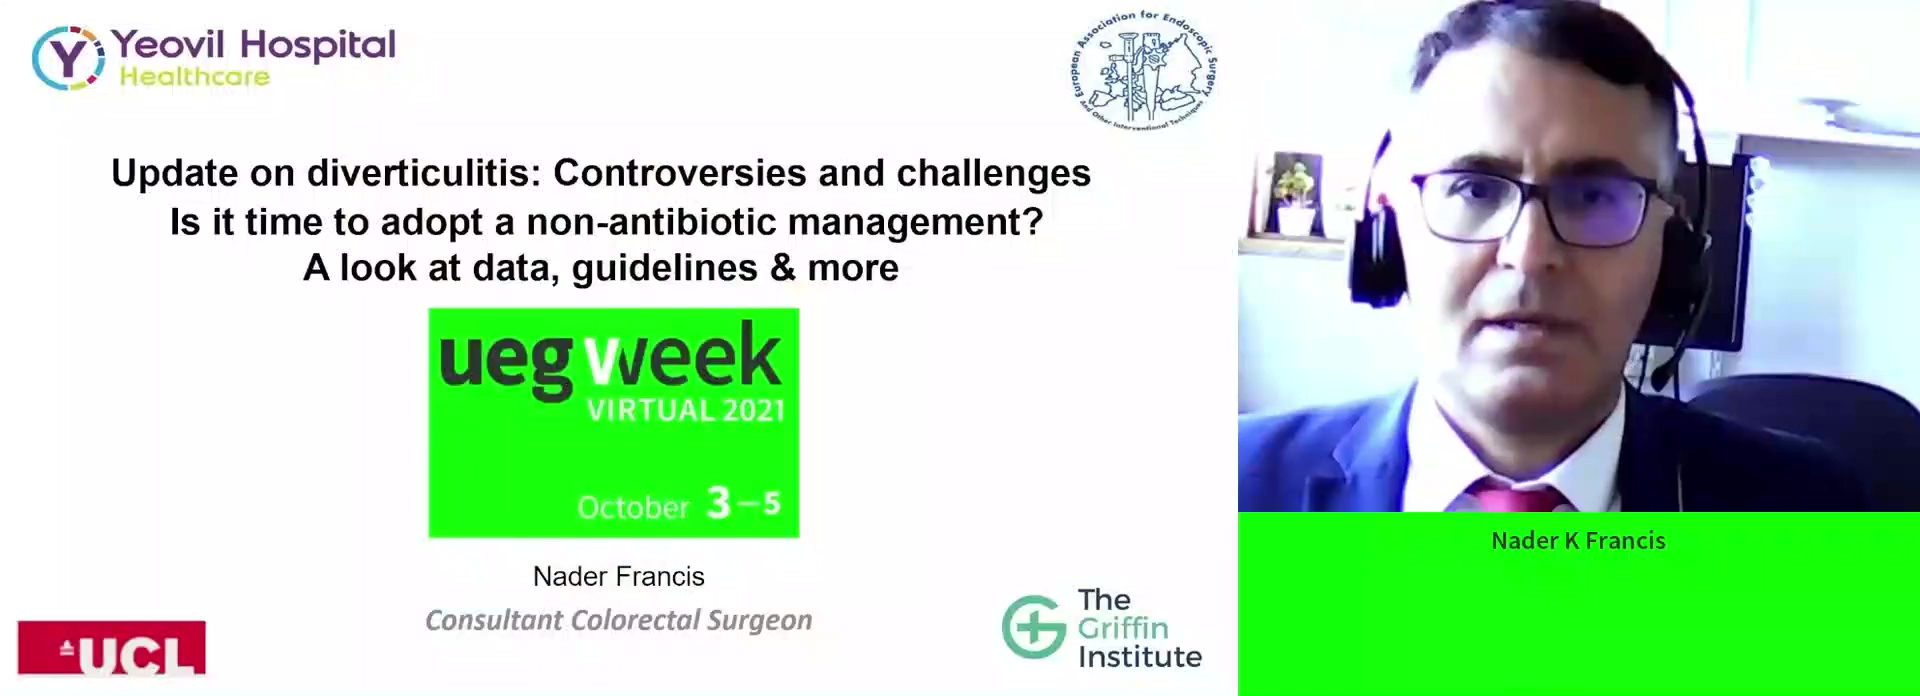 Is it time to adpot a non-antibiotic management? A look at data, guidelines & more